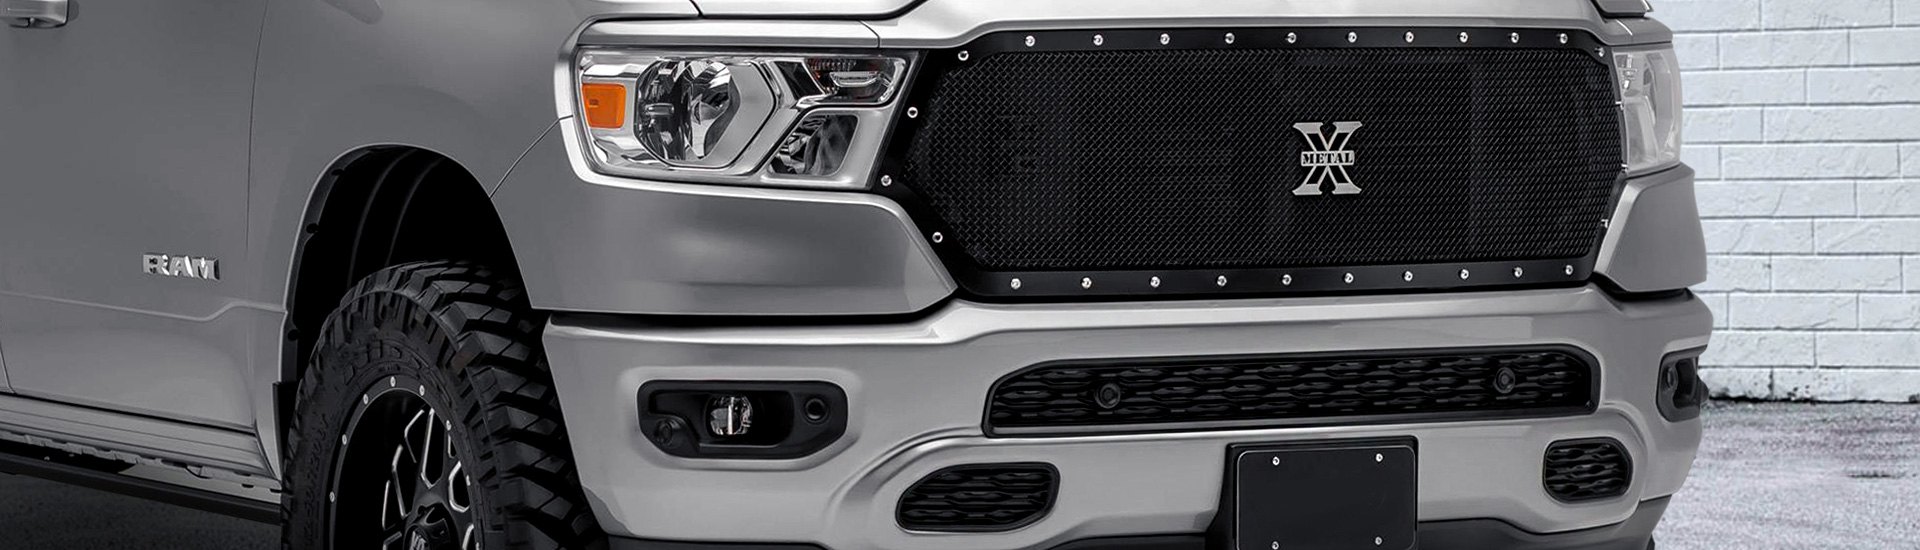 Meet Freshly Released Line-Up Of Custom Grilles by T-Rex For The New Generation Dodge Ram